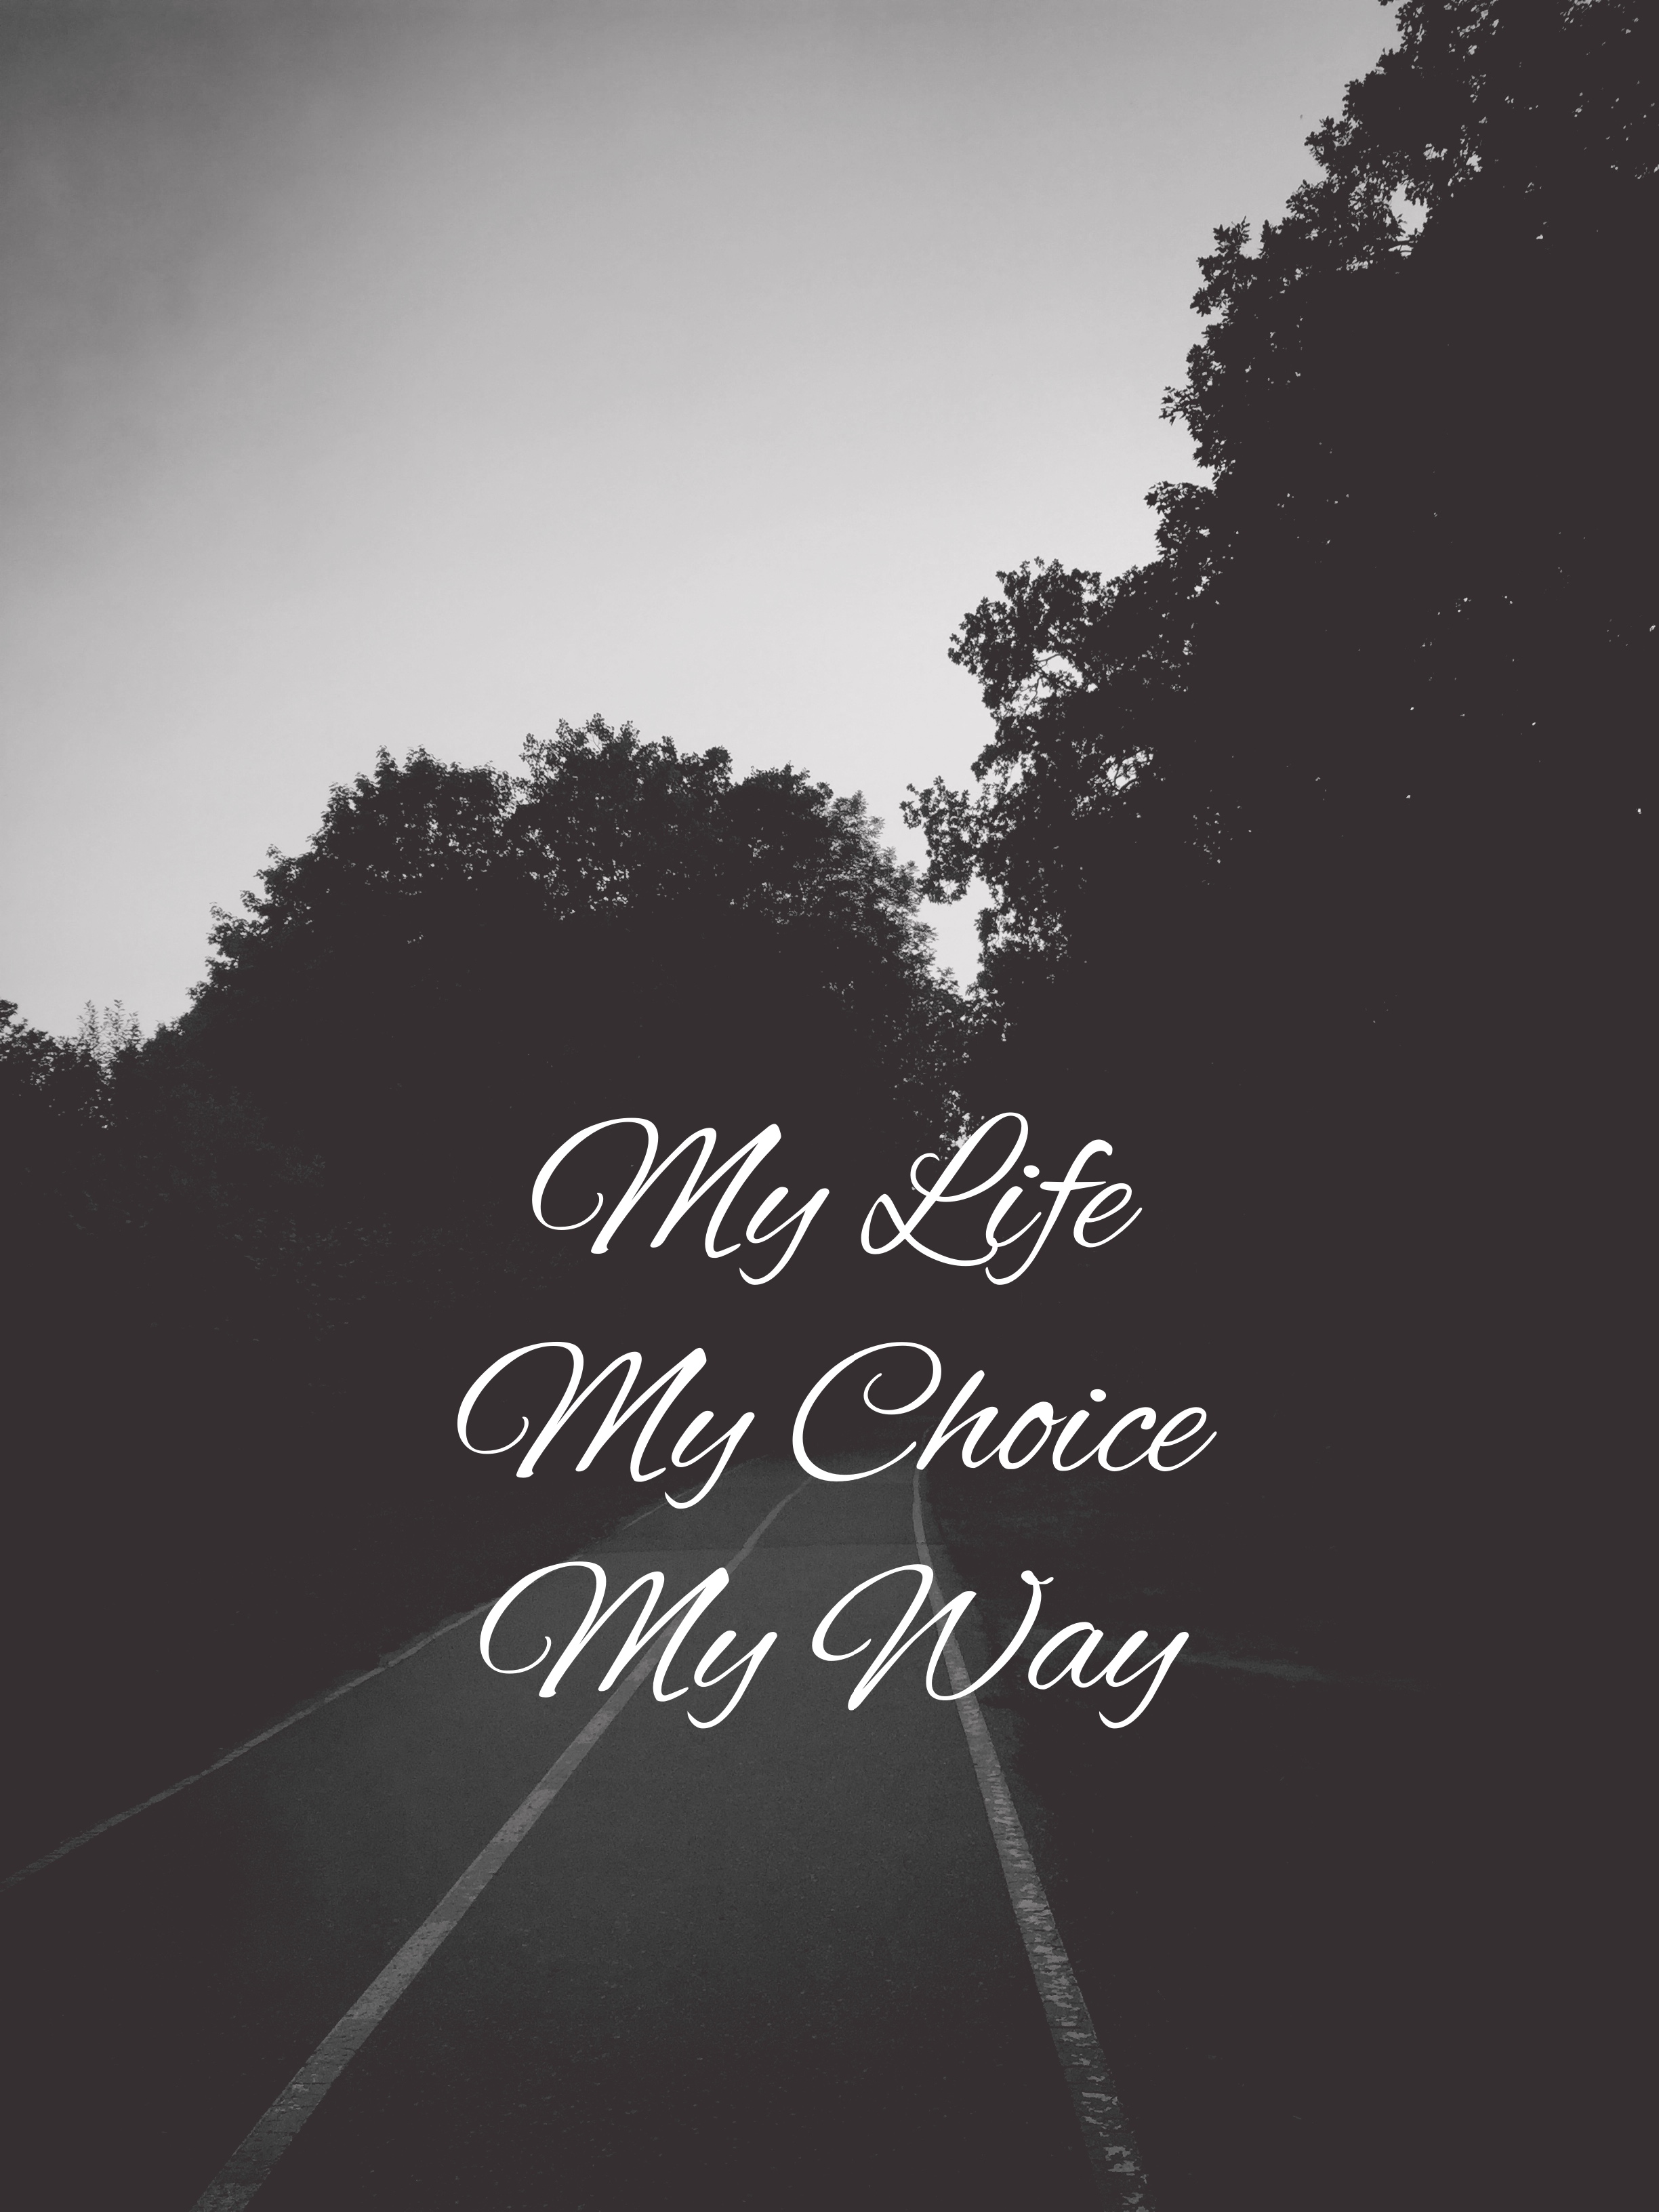 bw, words, text, quotation, quote, chb, inscription, road, path, way wallpaper for mobile